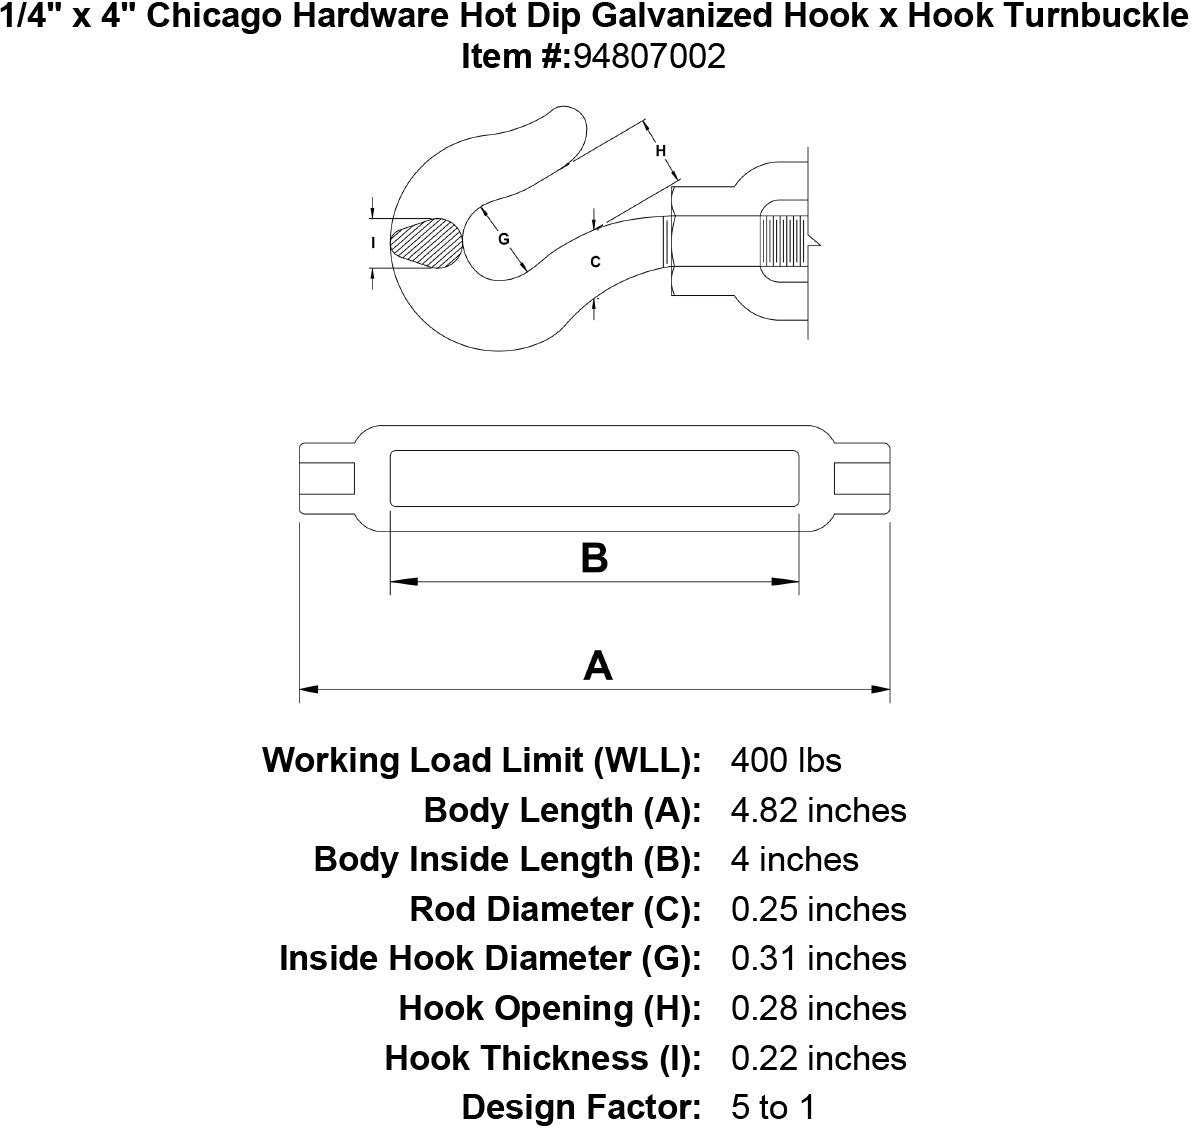 Galvanized Chicago Hardware 02170 8 Carbon Hook and Hook Turnbuckle 1,500 lb 1/2 x 2 Diameter Working Load Limit